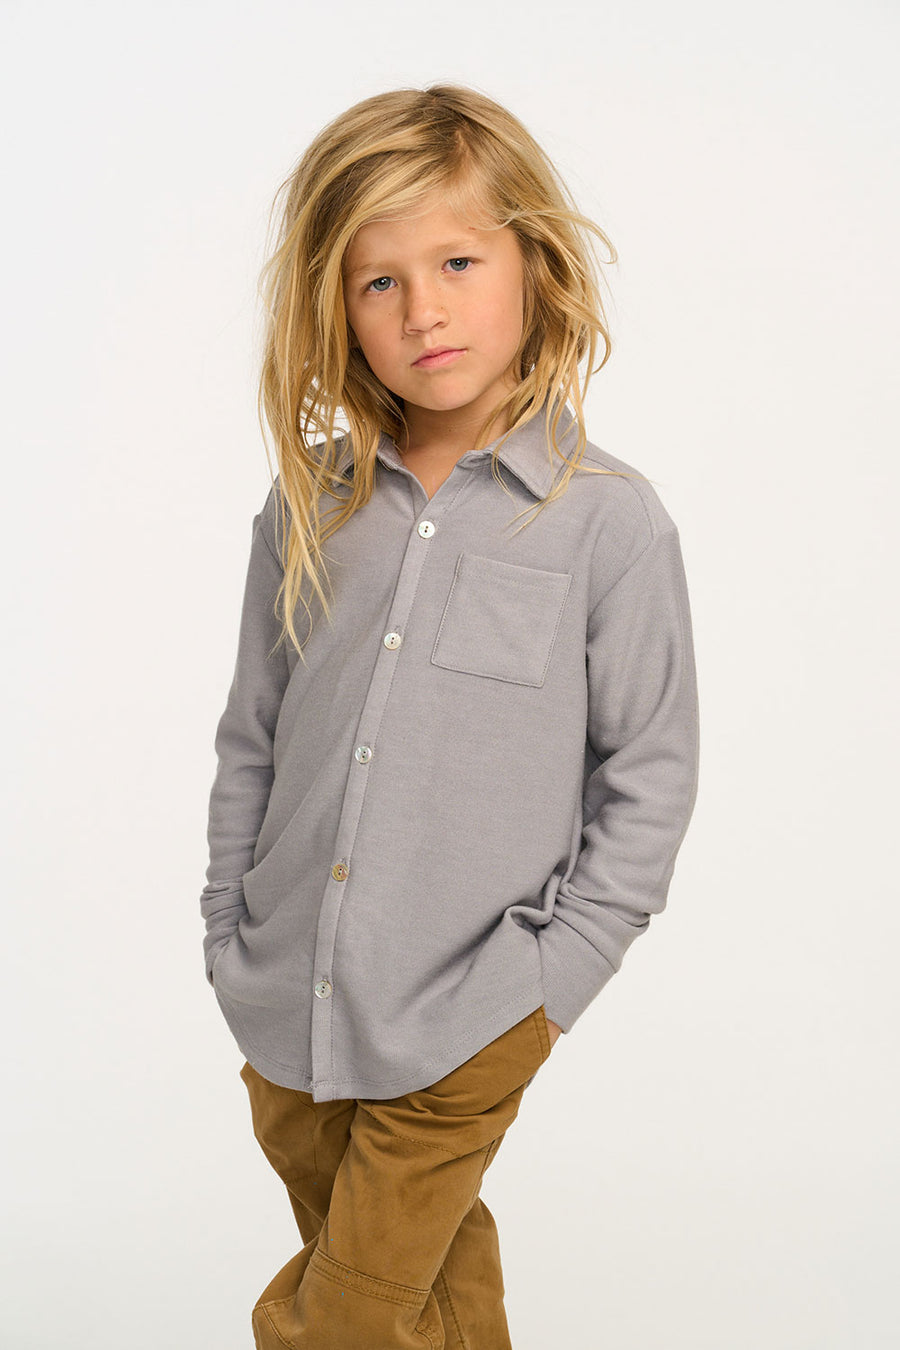 Silver Gray Button Down Shirt BOYS chaserbrand